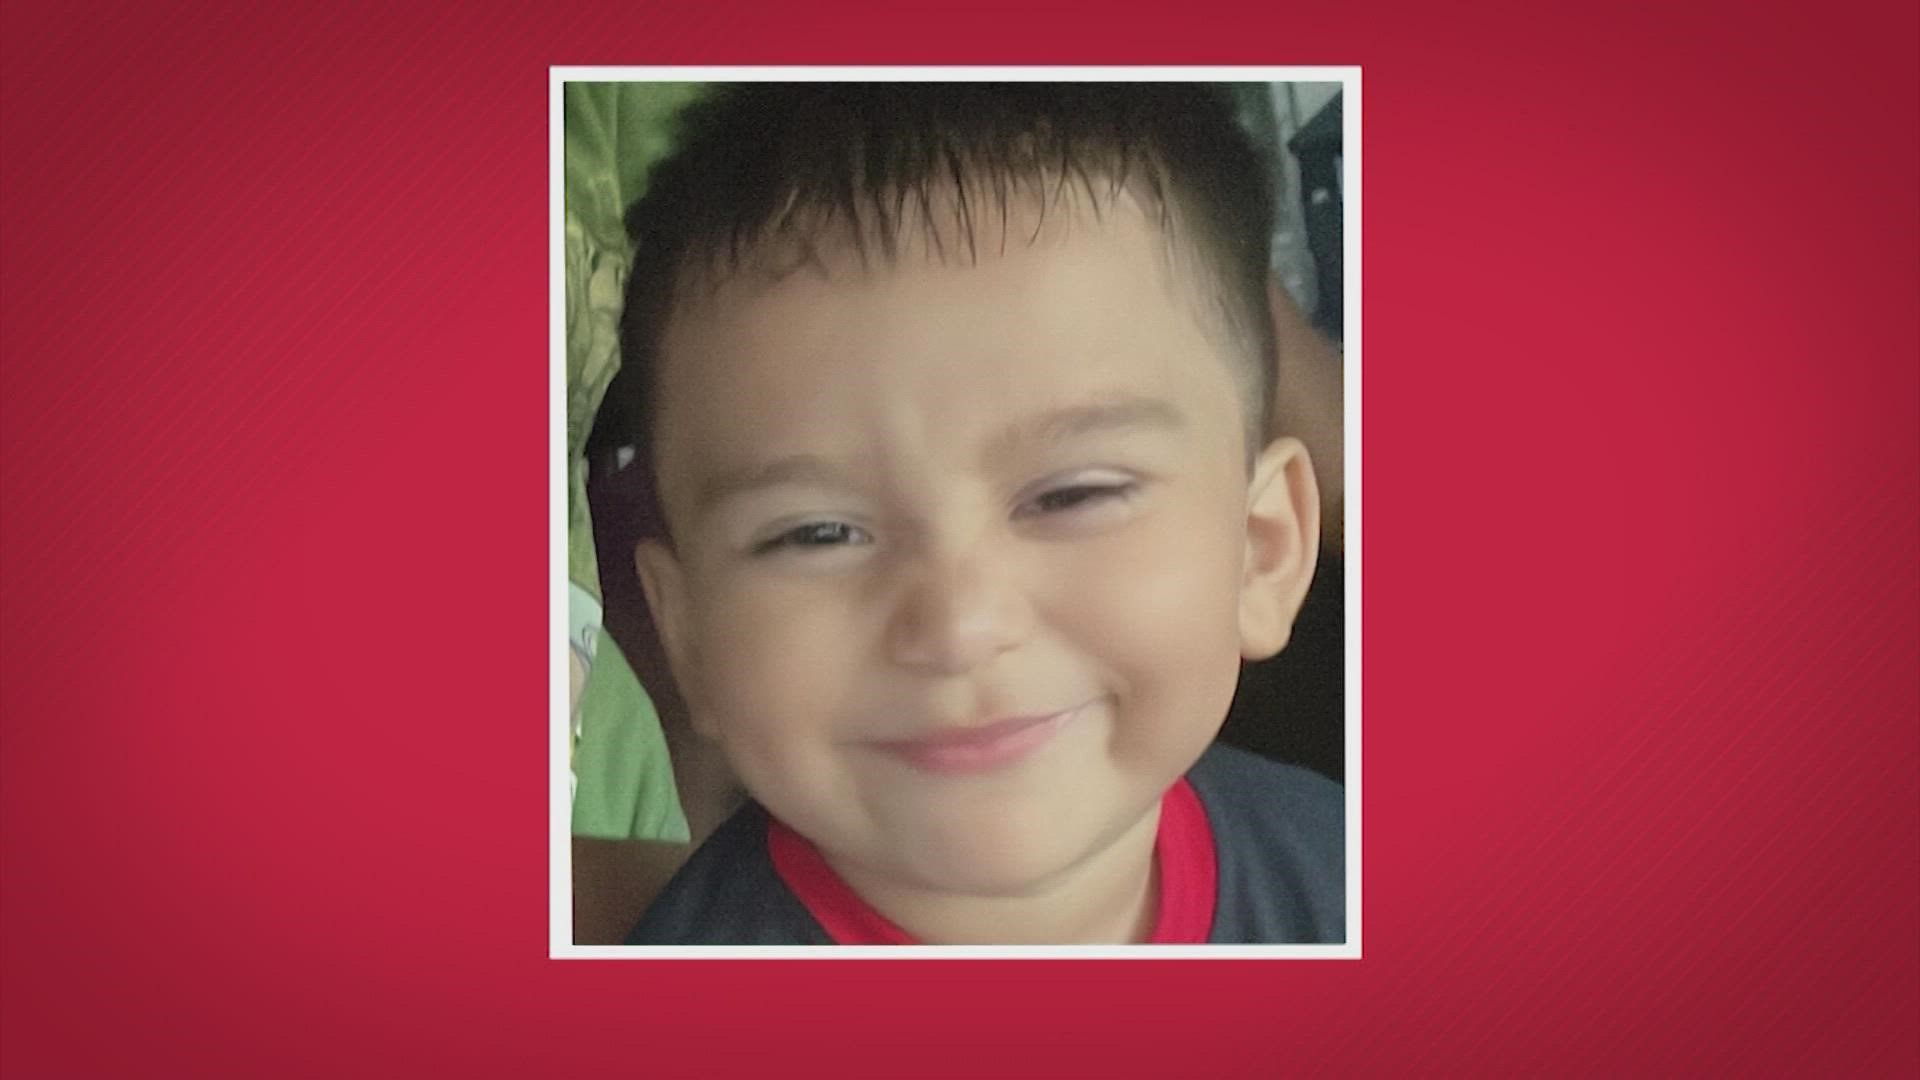 The search is still coming up empty for a missing 3-year-old Grimes County boy. On Friday, the sheriff said the family has been ruled out as persons of interests.